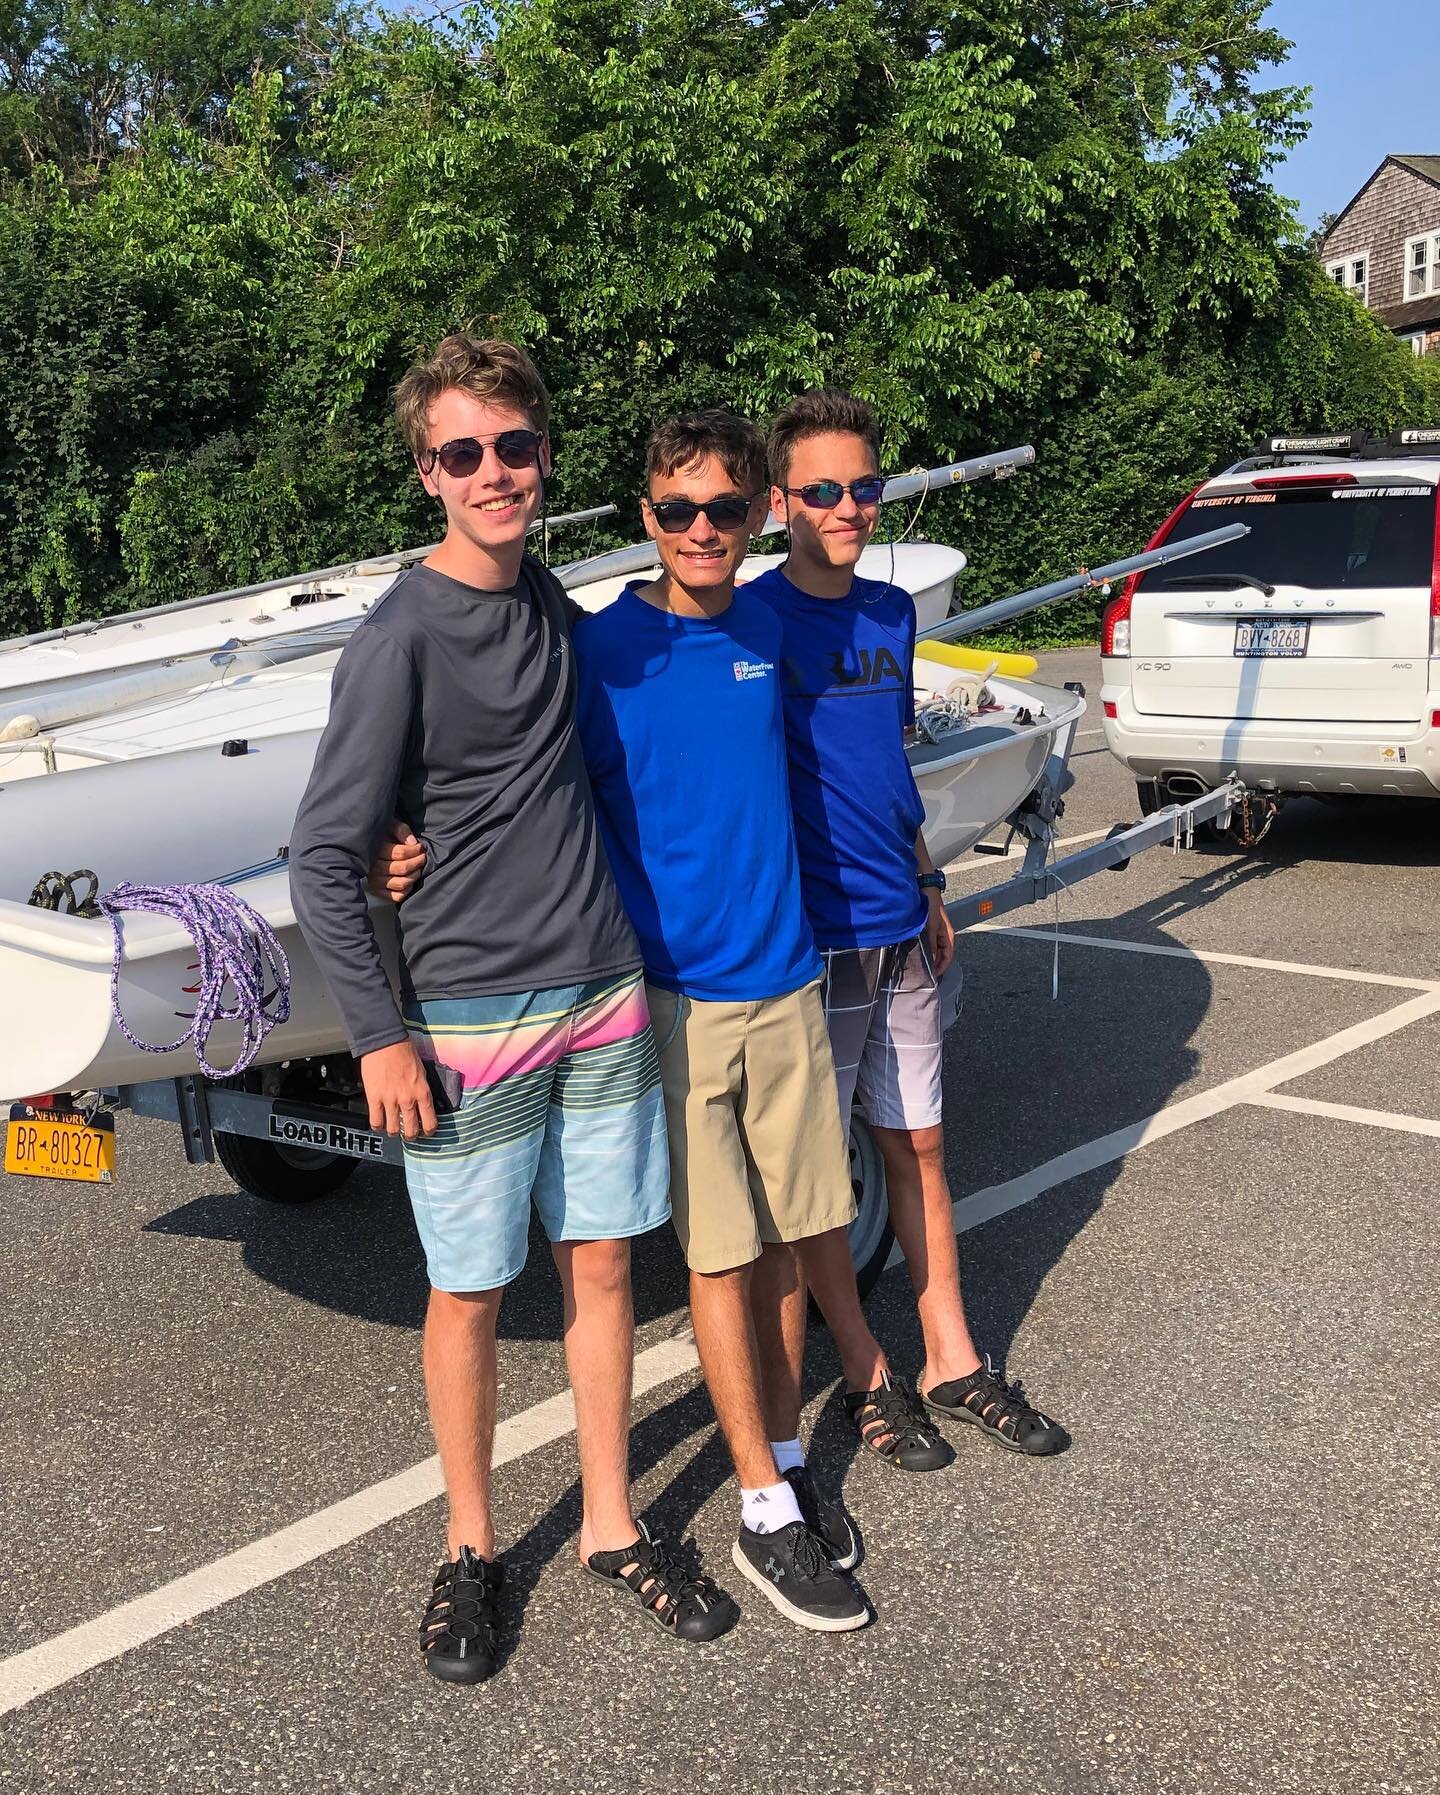 We want to congratulate our sailors for their great accomplishments in regattas from the past 2 weeks! Nikolas Wiggins raced in the JSA Opti Invitational at Shelter Island Yacht Club where he placed 7th in Blue Fleet, out of a 23 boat fleet. Rigel an